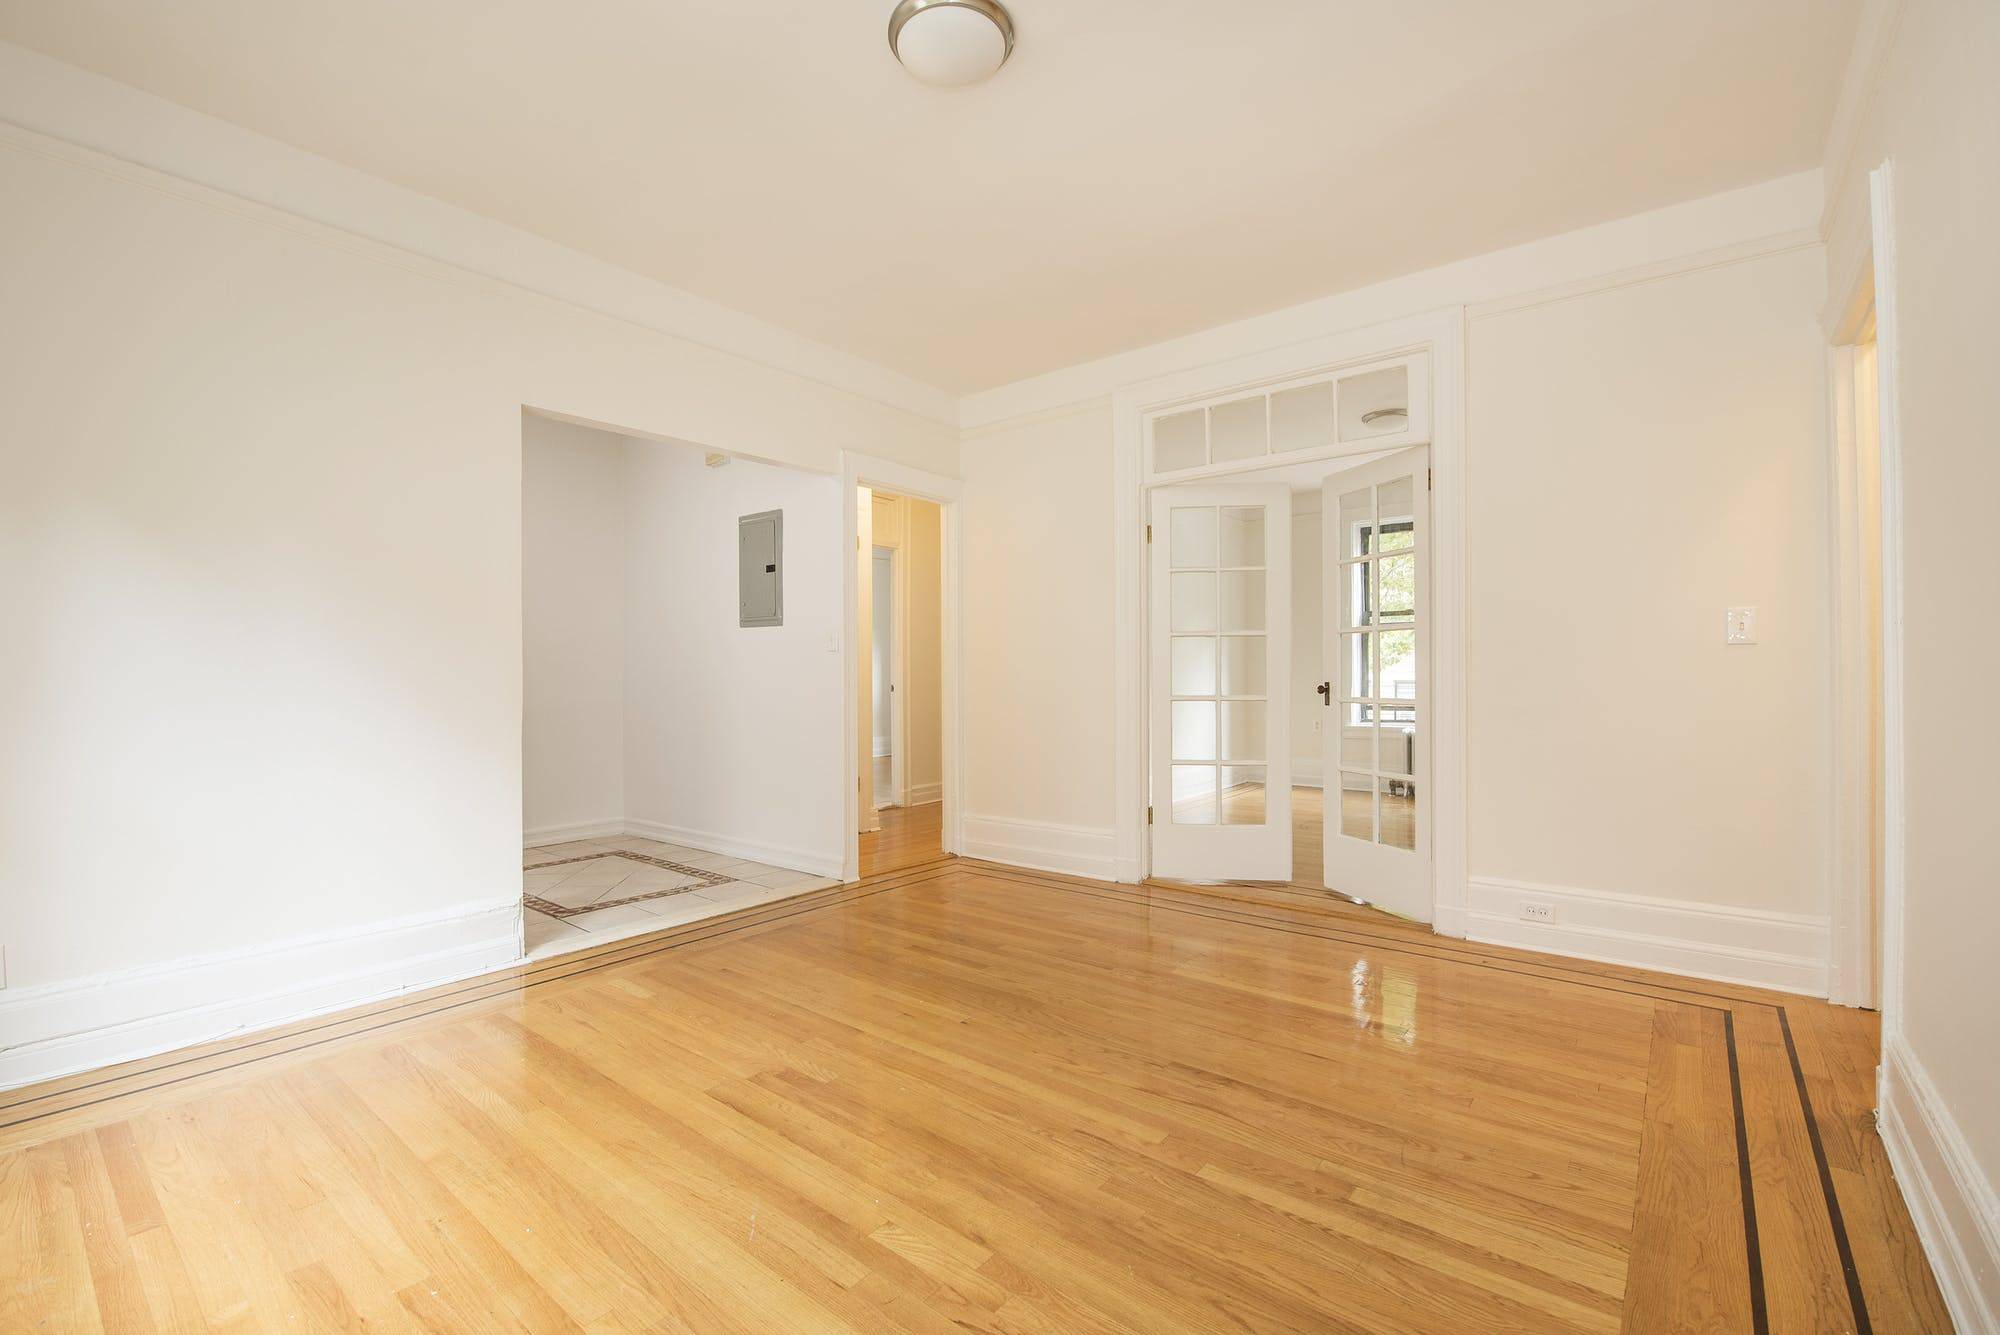 NO BROKERS FEE for this RENT STABILIZED apartment !